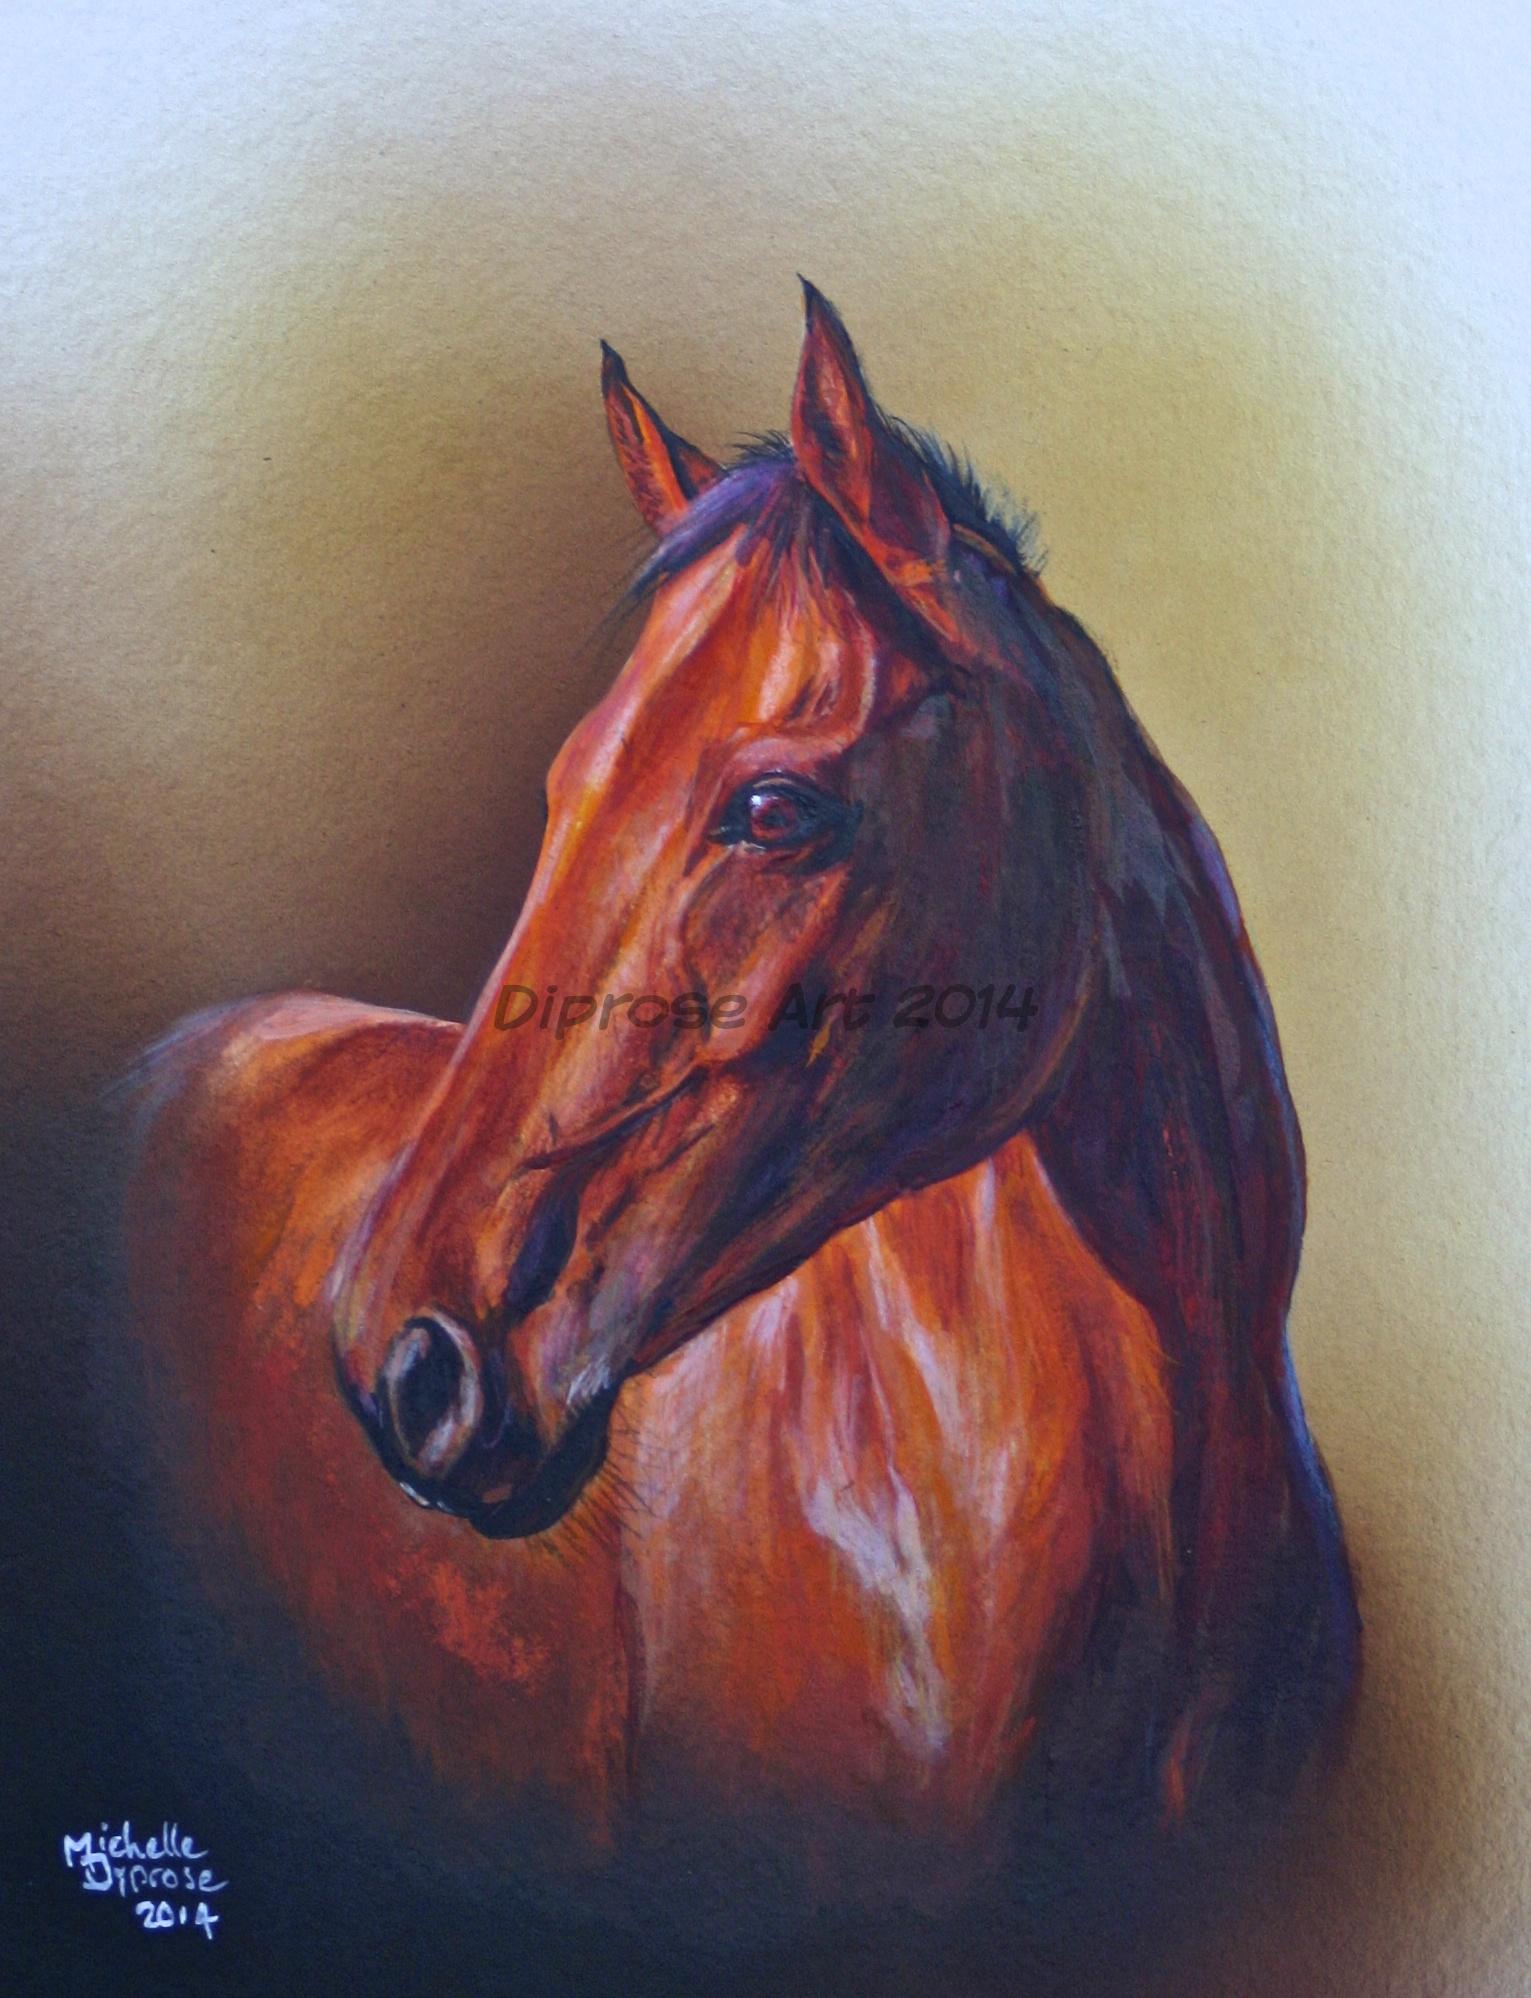 Acrylics on board - approx A4 -  horse portrait - I like painting Thoroghbreds - they have such rich shiny coats and expressive eyes.  